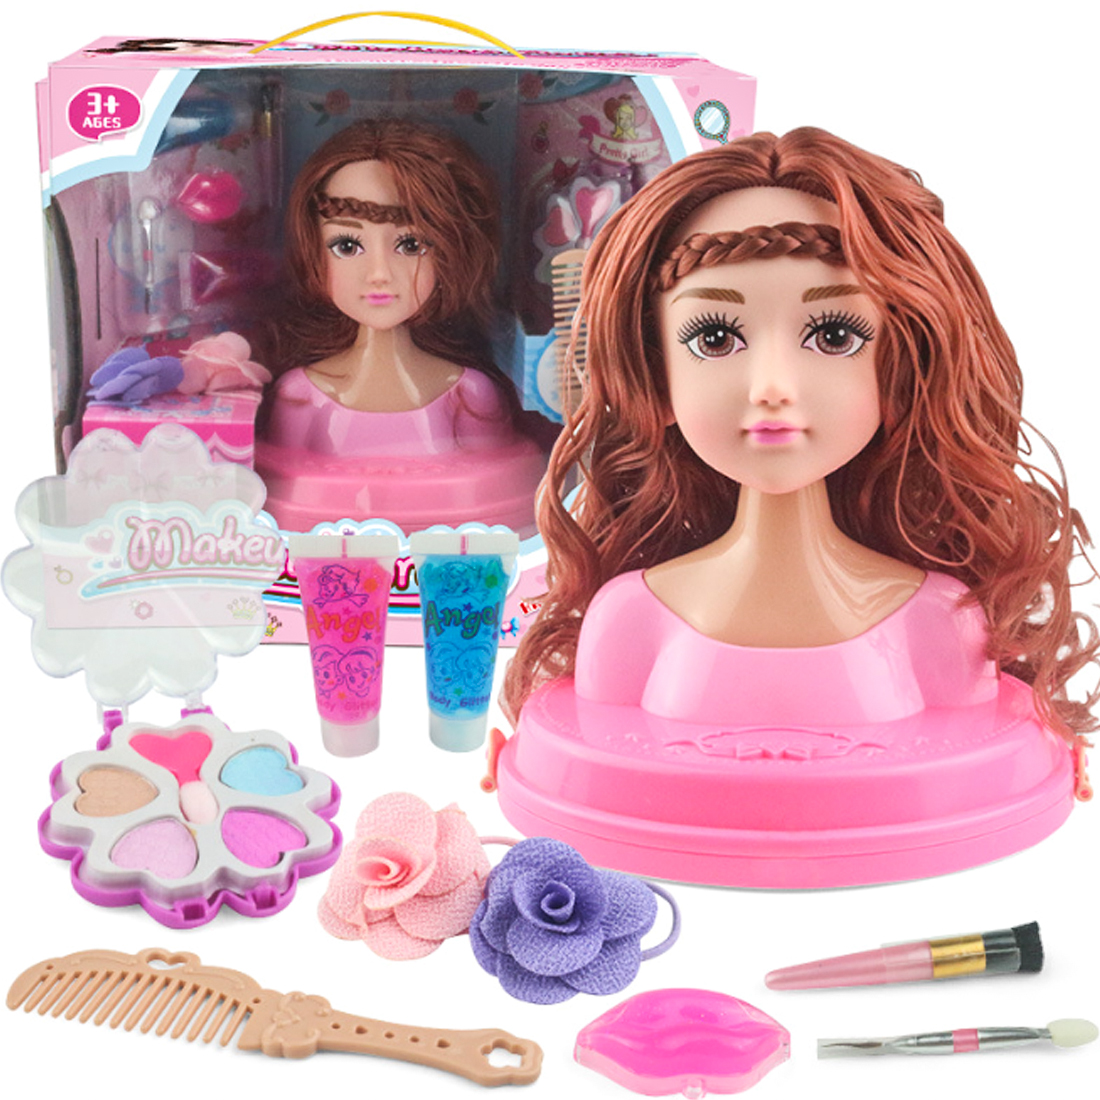 Children Head Model Half Body Doll Toy Makeup Hairstyle Beauty Simulation Plastic Girls Gift Toy - Random Color